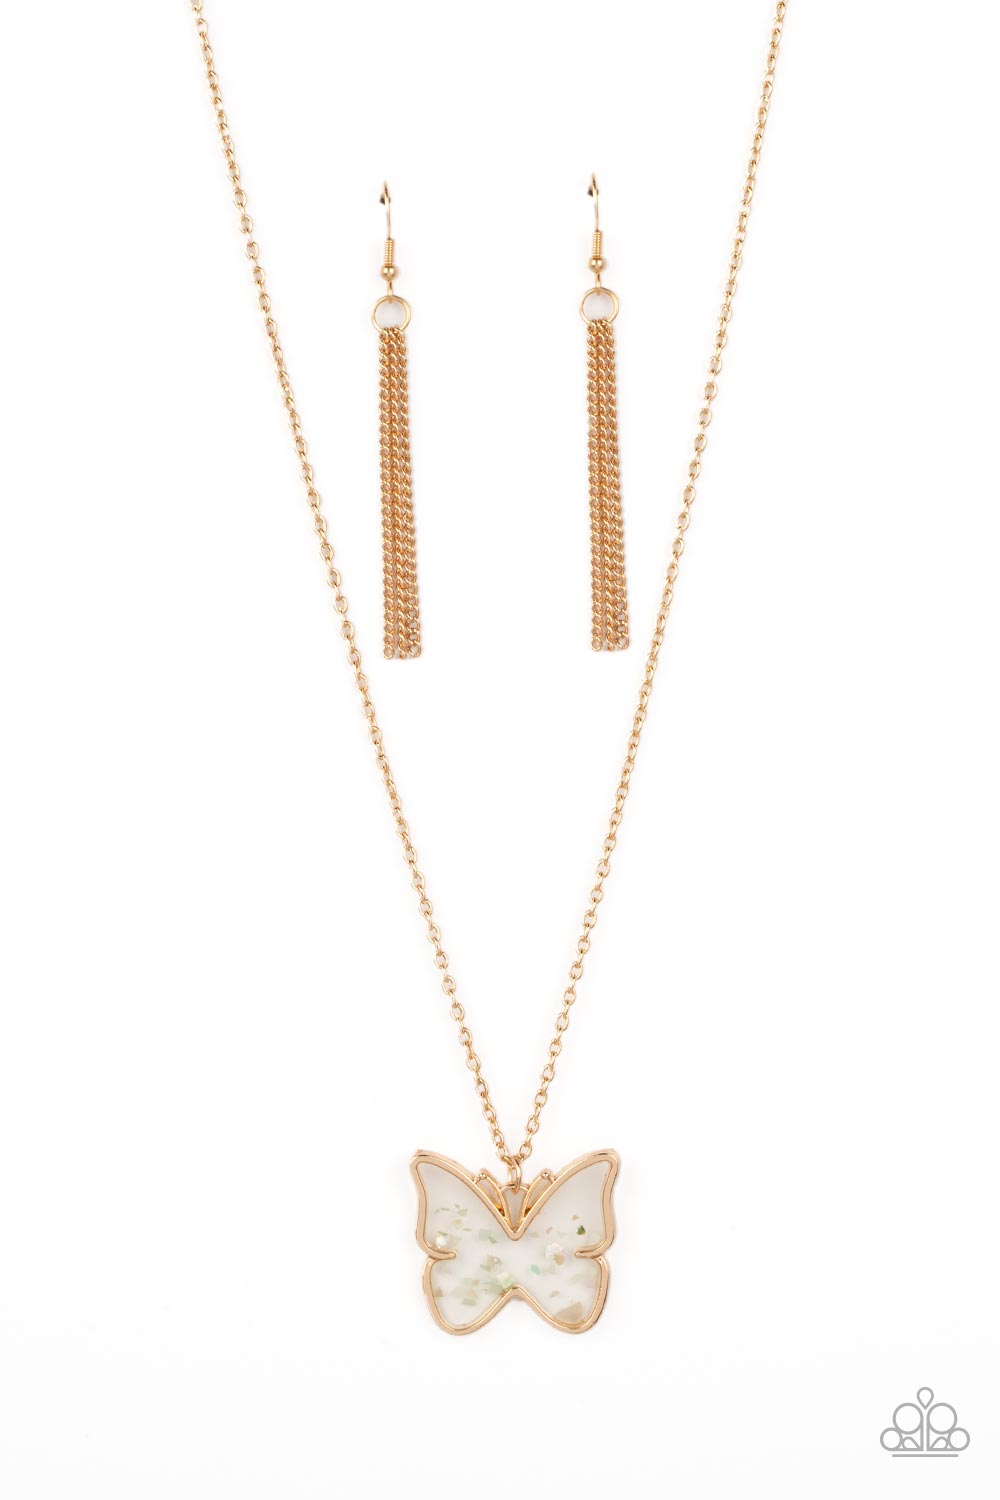 Gives Me Butterflies - gold - Paparazzi necklace